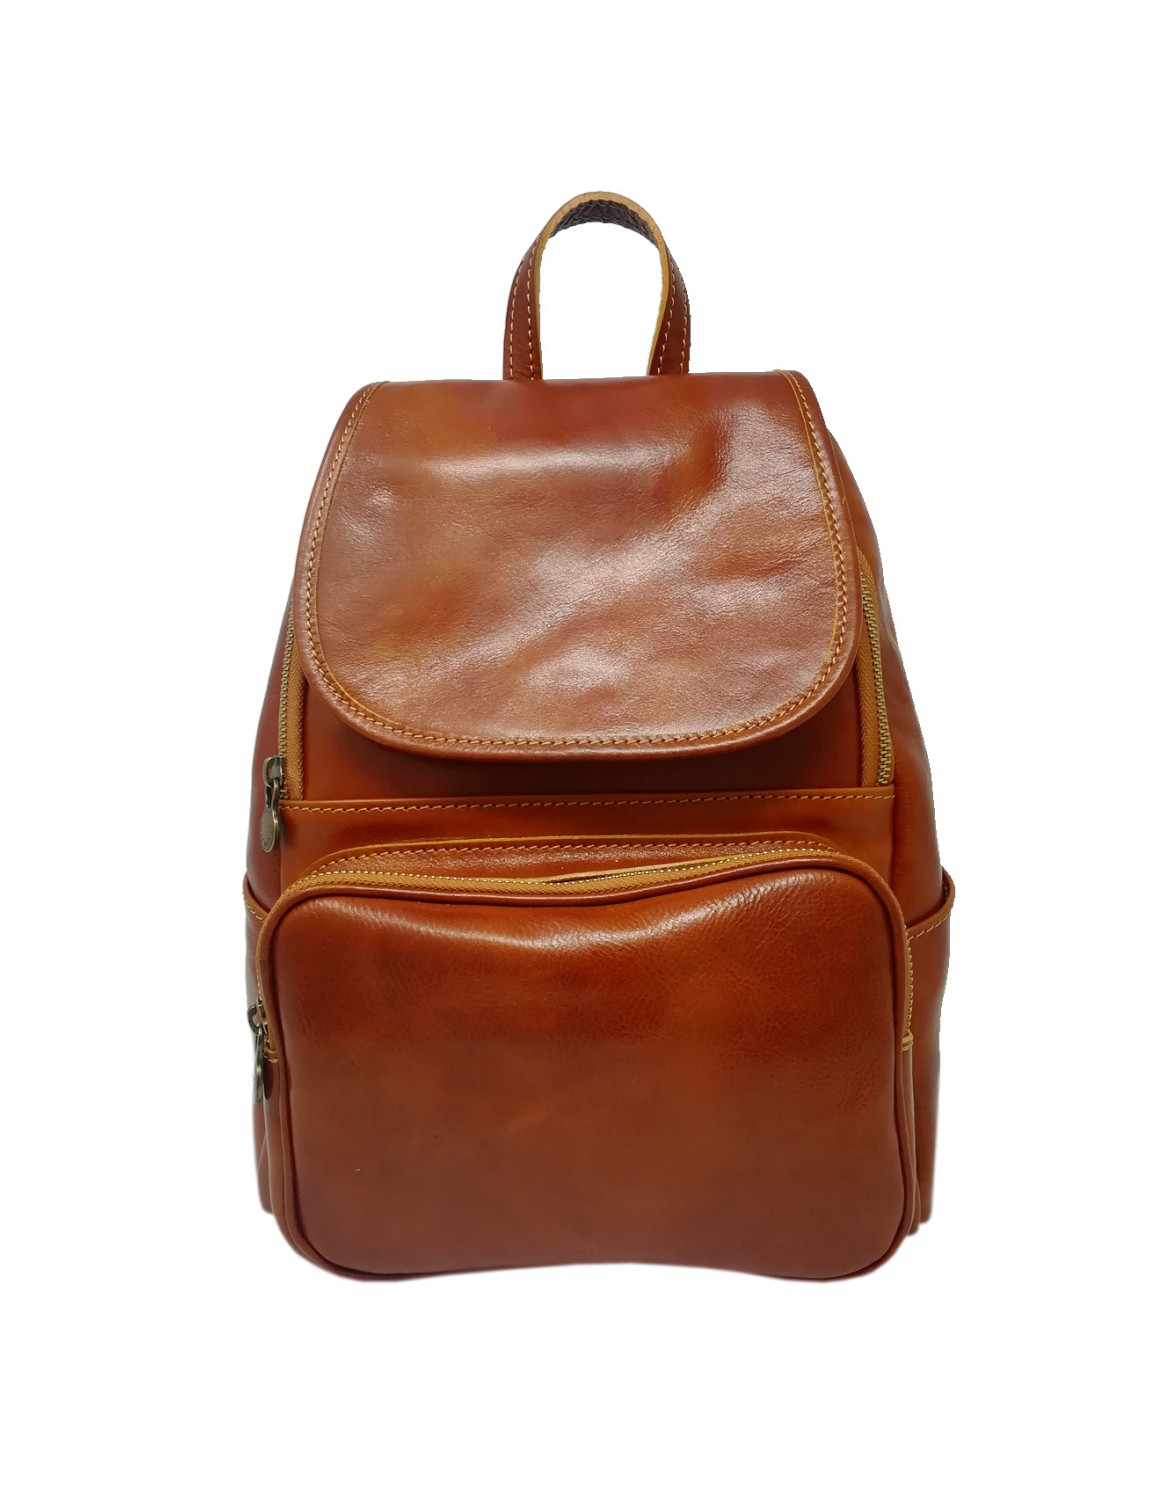 Leather Backpacks - Buy Leather Backpacks Online at Best Prices In India |  Flipkart.com